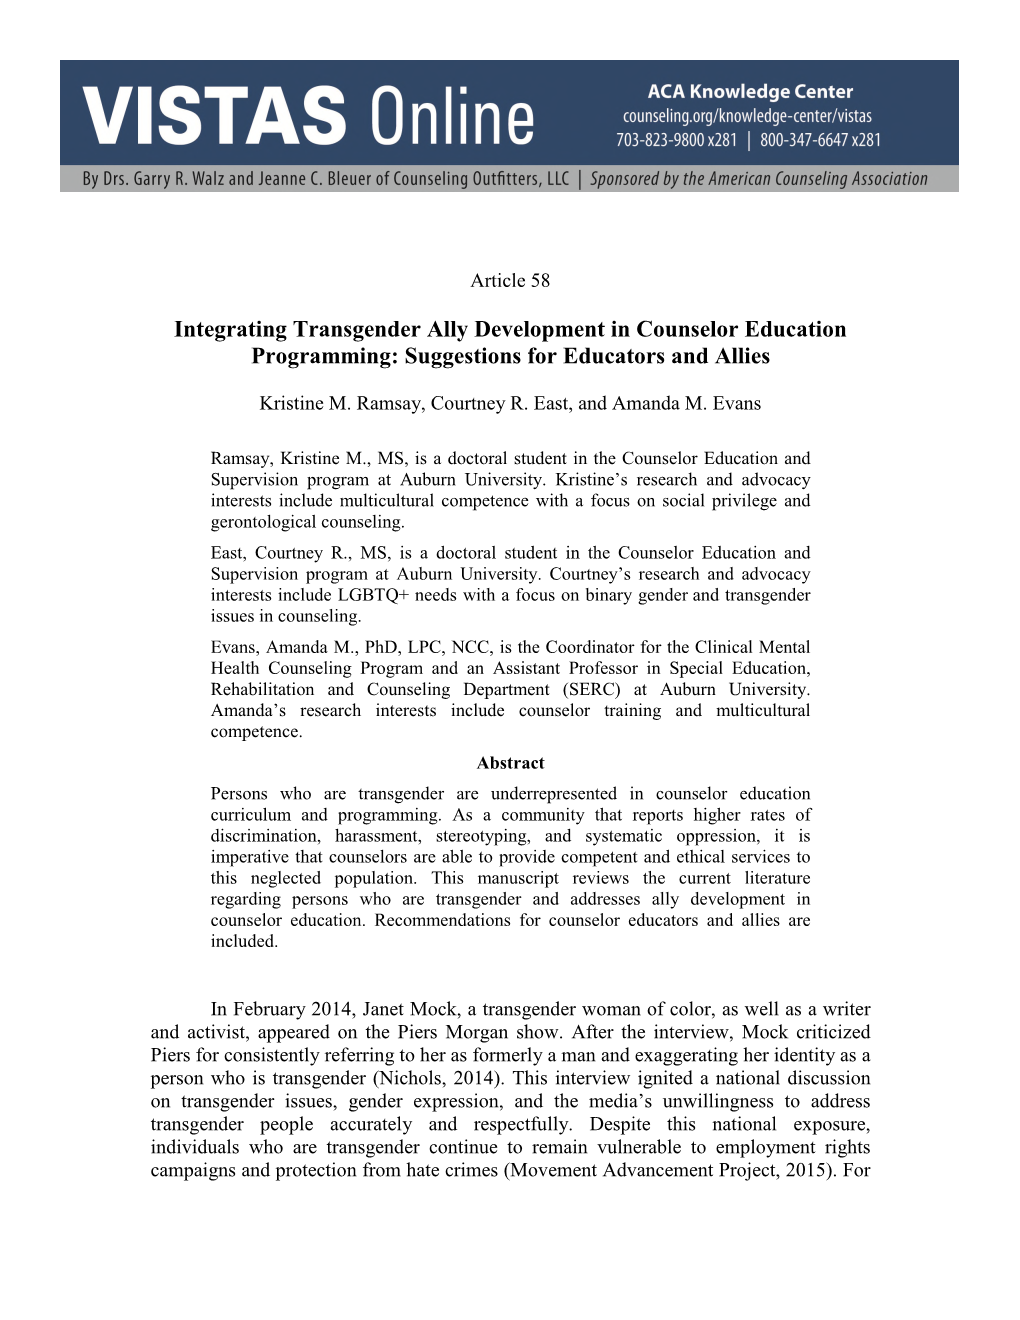 Integrating Transgender Ally Development in Counselor Education Programming: Suggestions for Educators and Allies